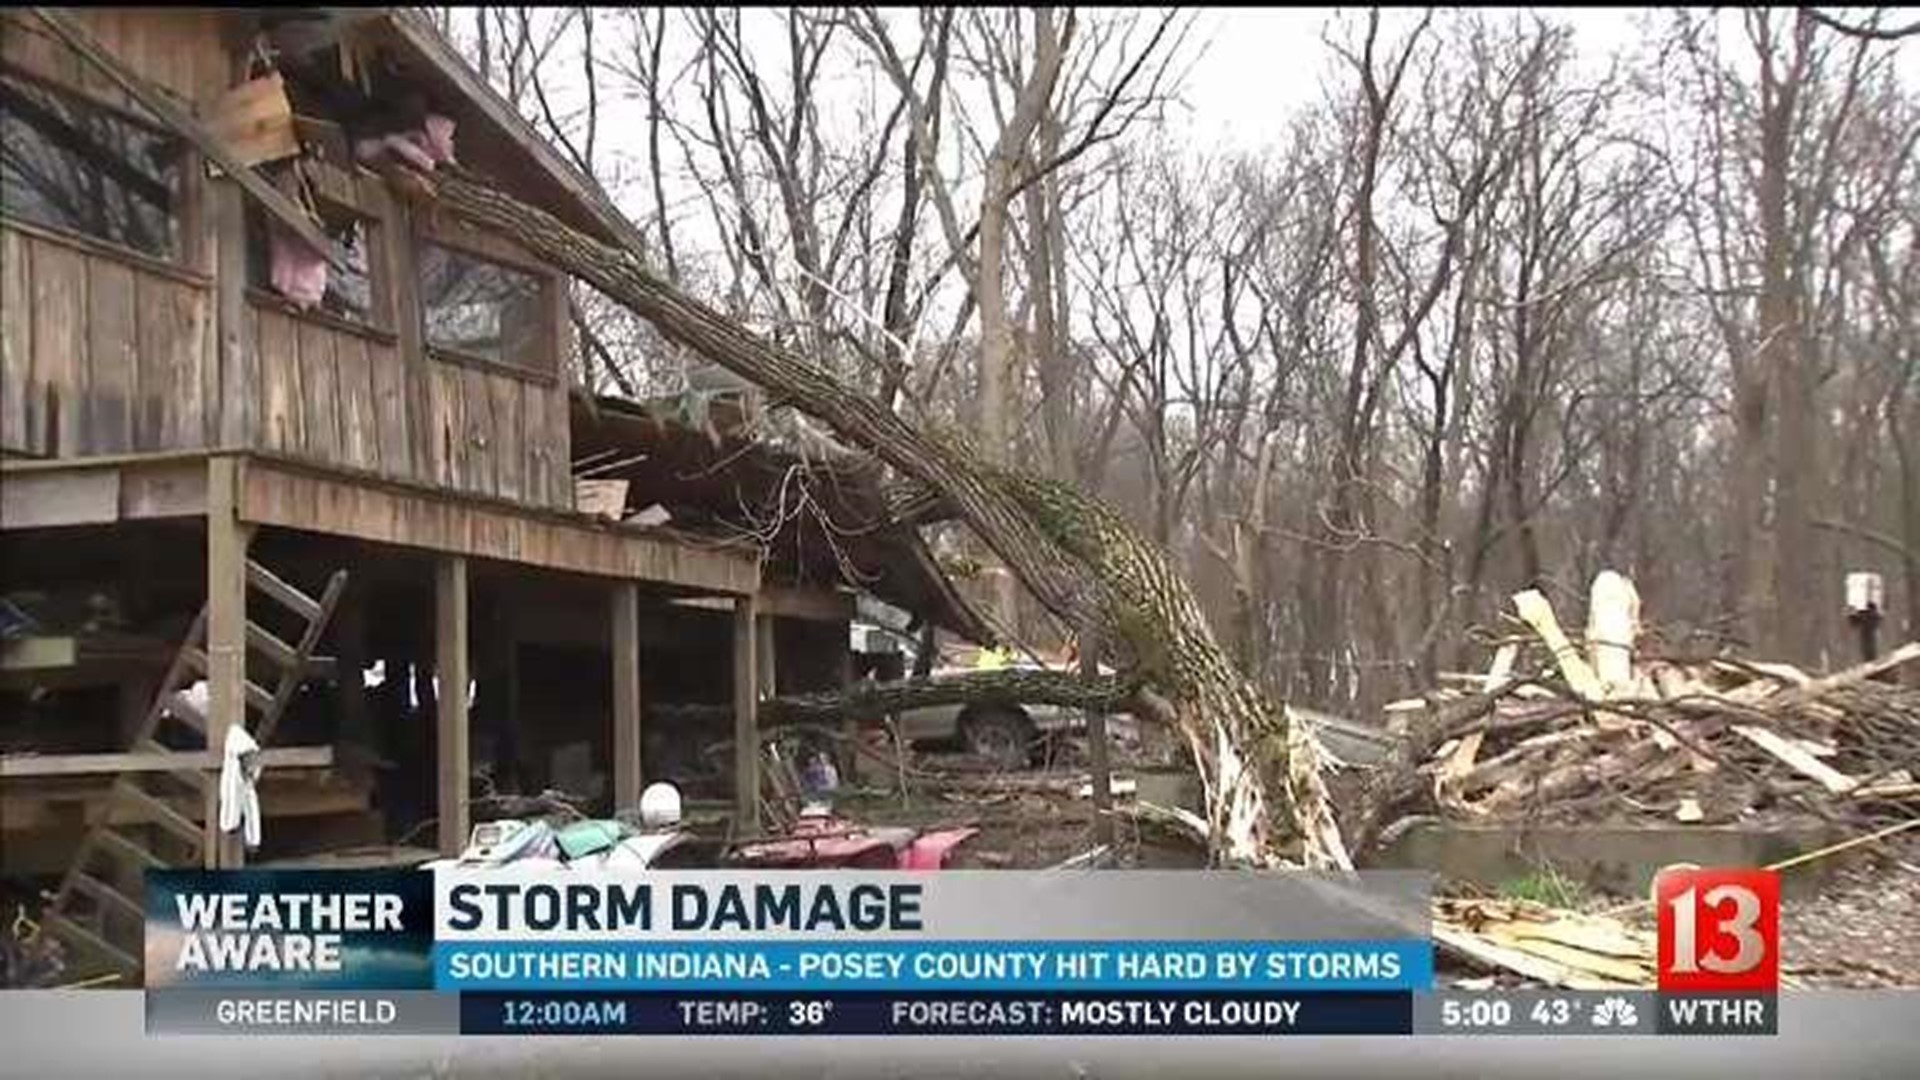 Tornado confirmed near Mitchell as southern Indiana cleans up from